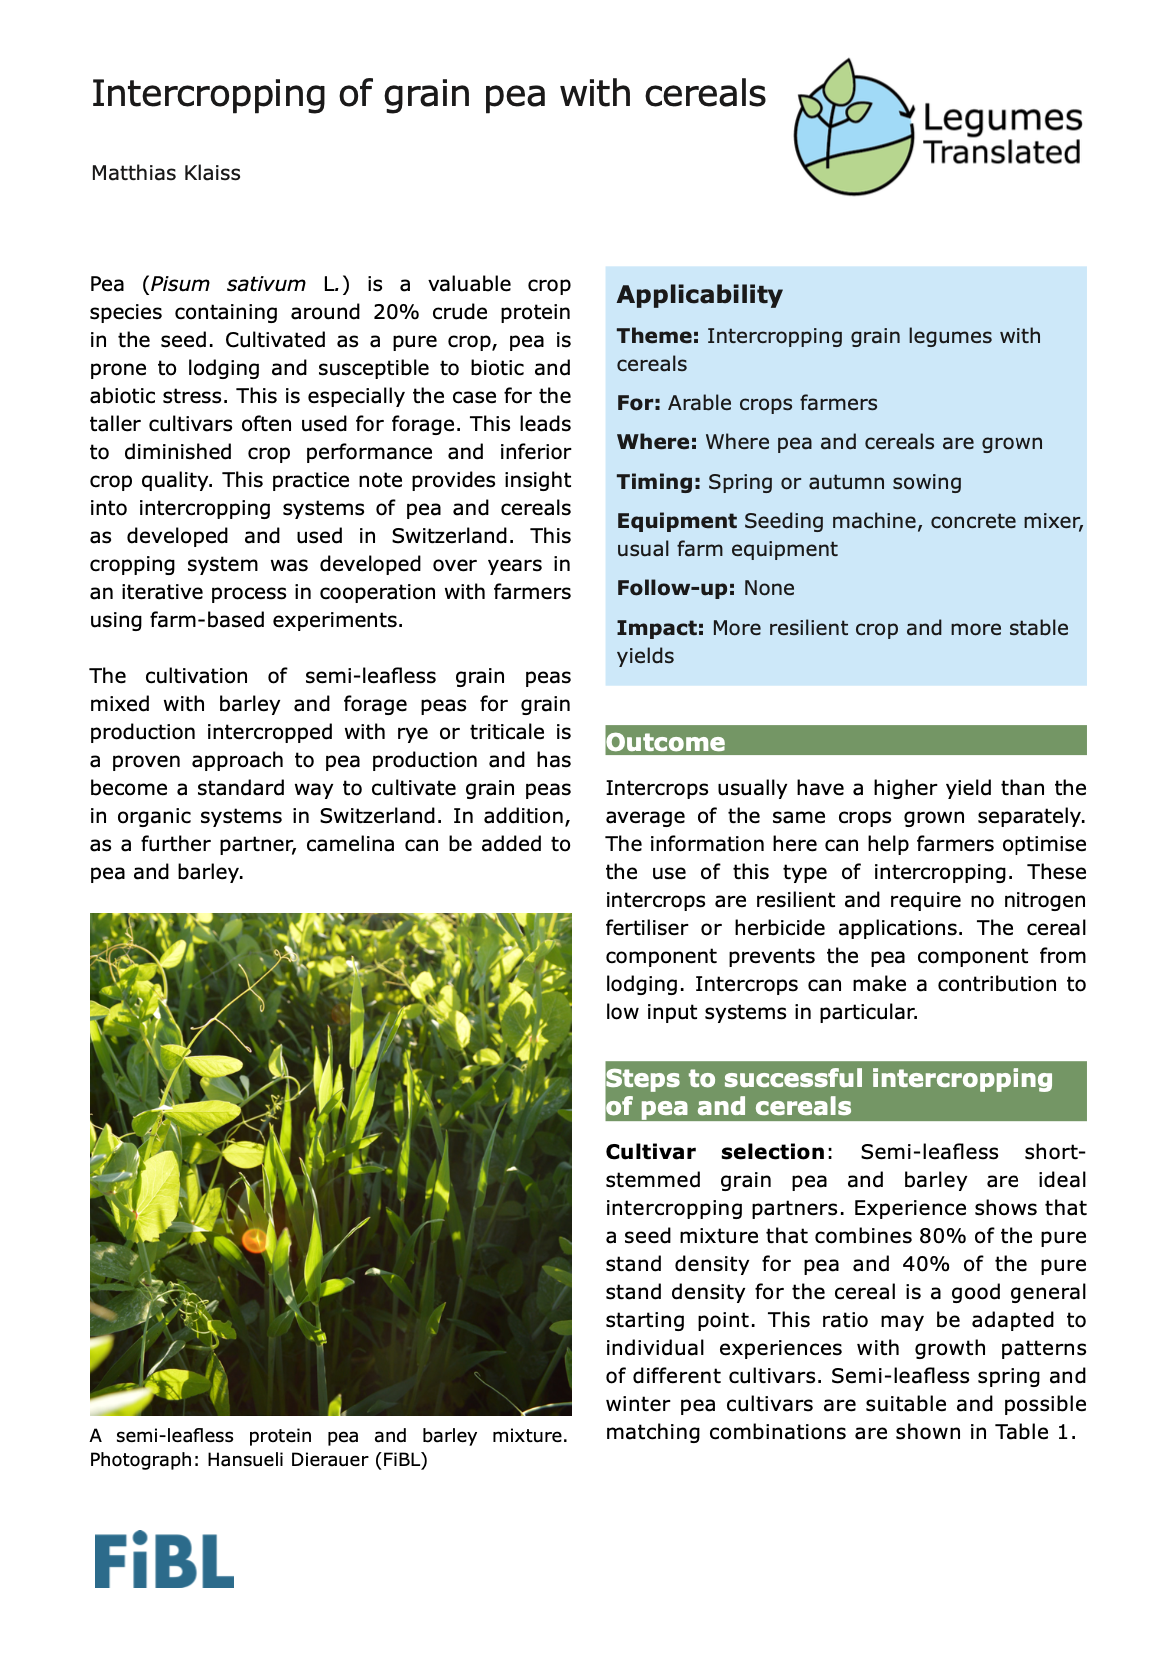 Intercropping of grain pea with cereals